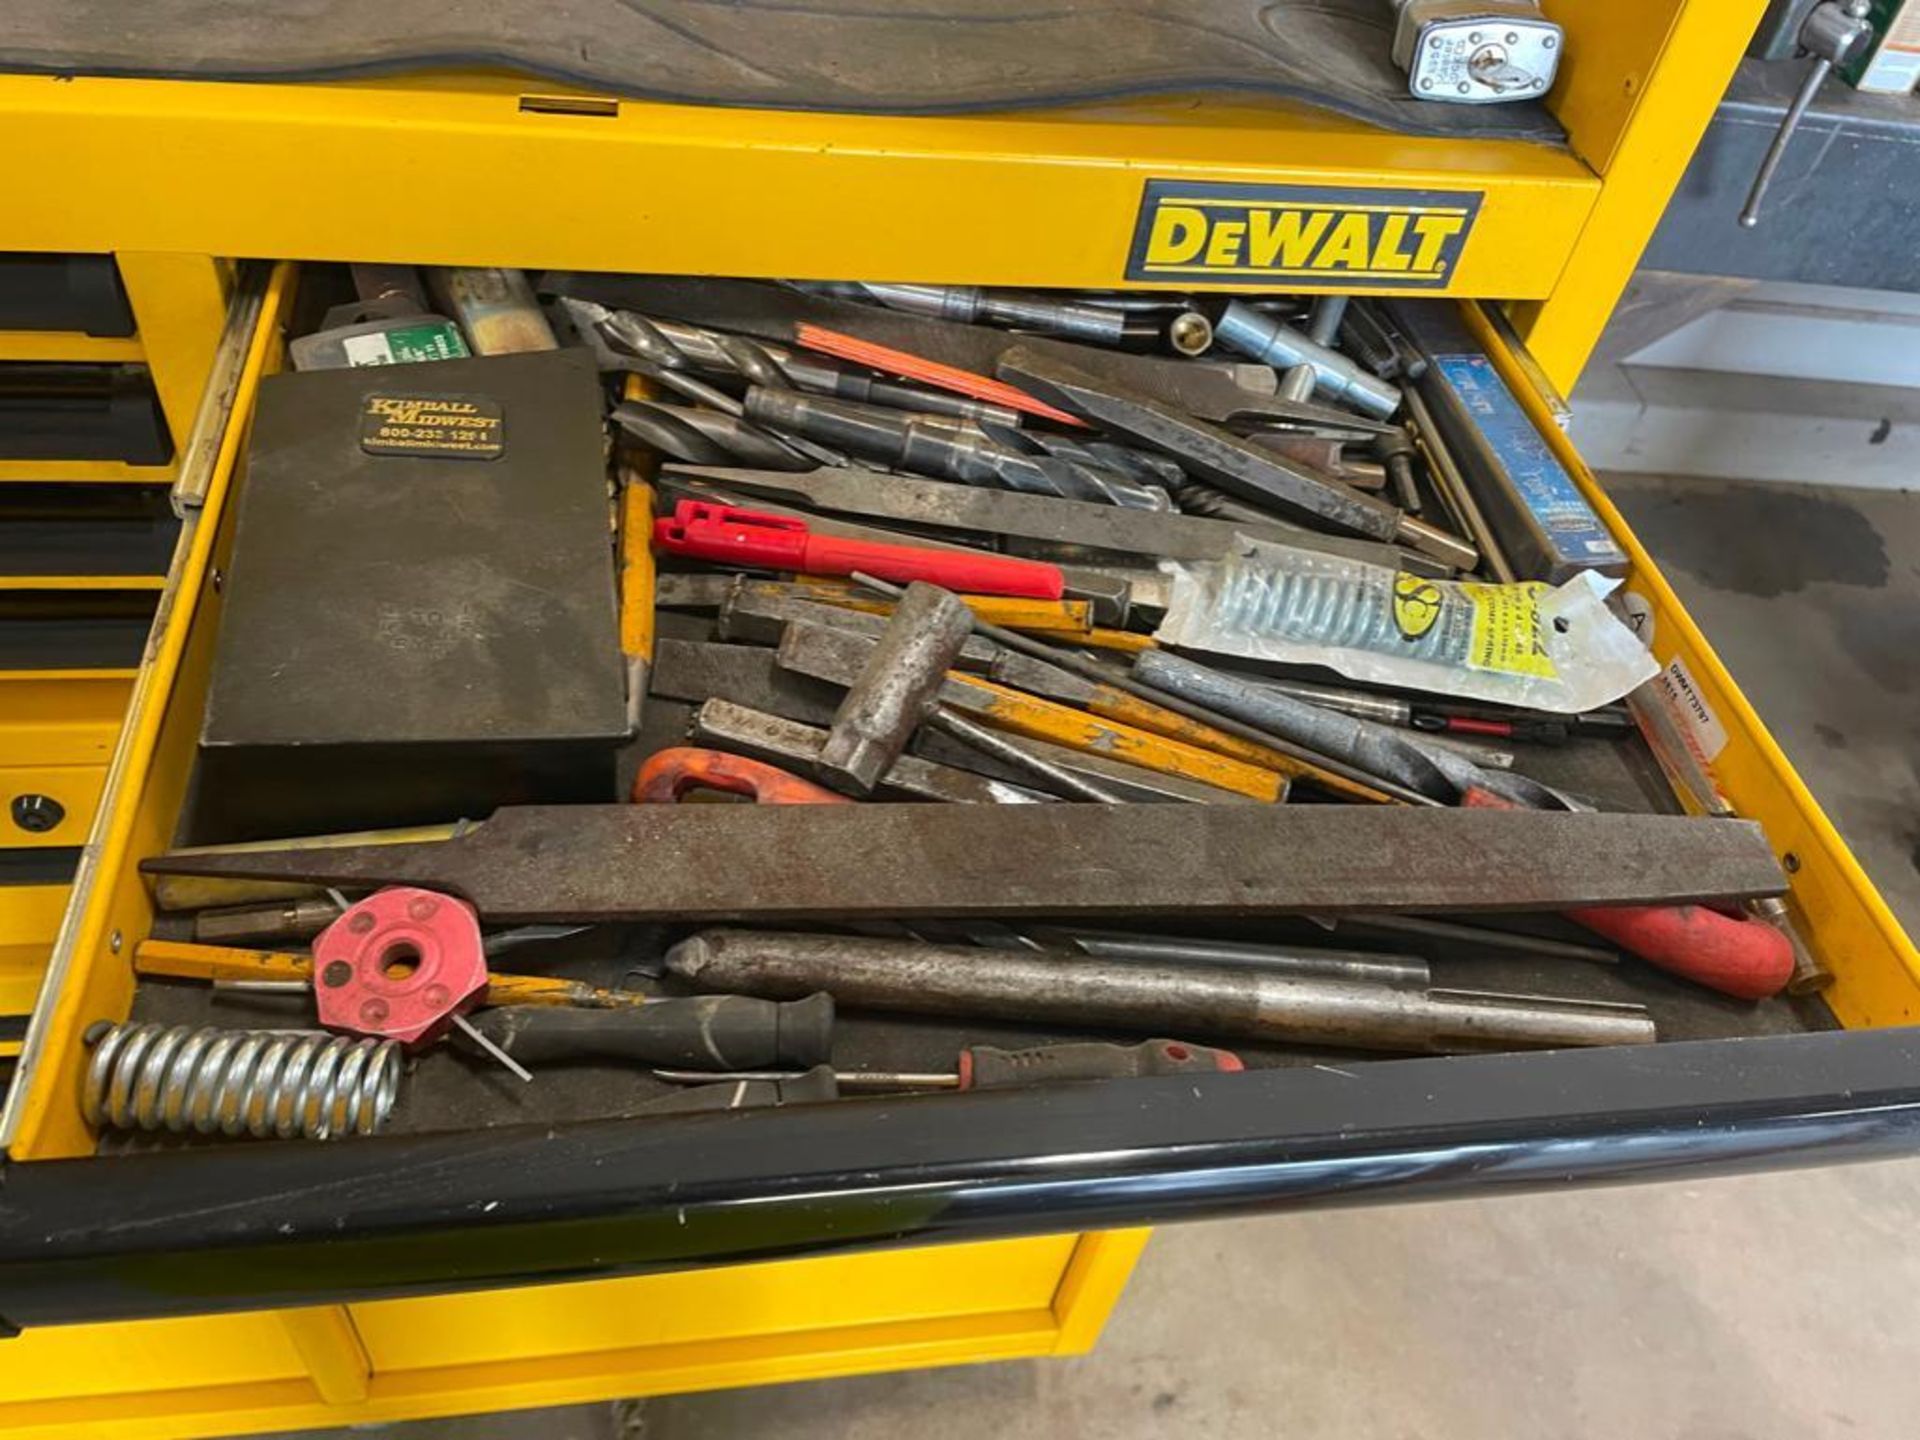 DeWalt Mechanics Tool Box with Contents, Wrenches, Sockets, Plyers, Pipe Wrench, Screwdrivers, etc. - Image 11 of 24